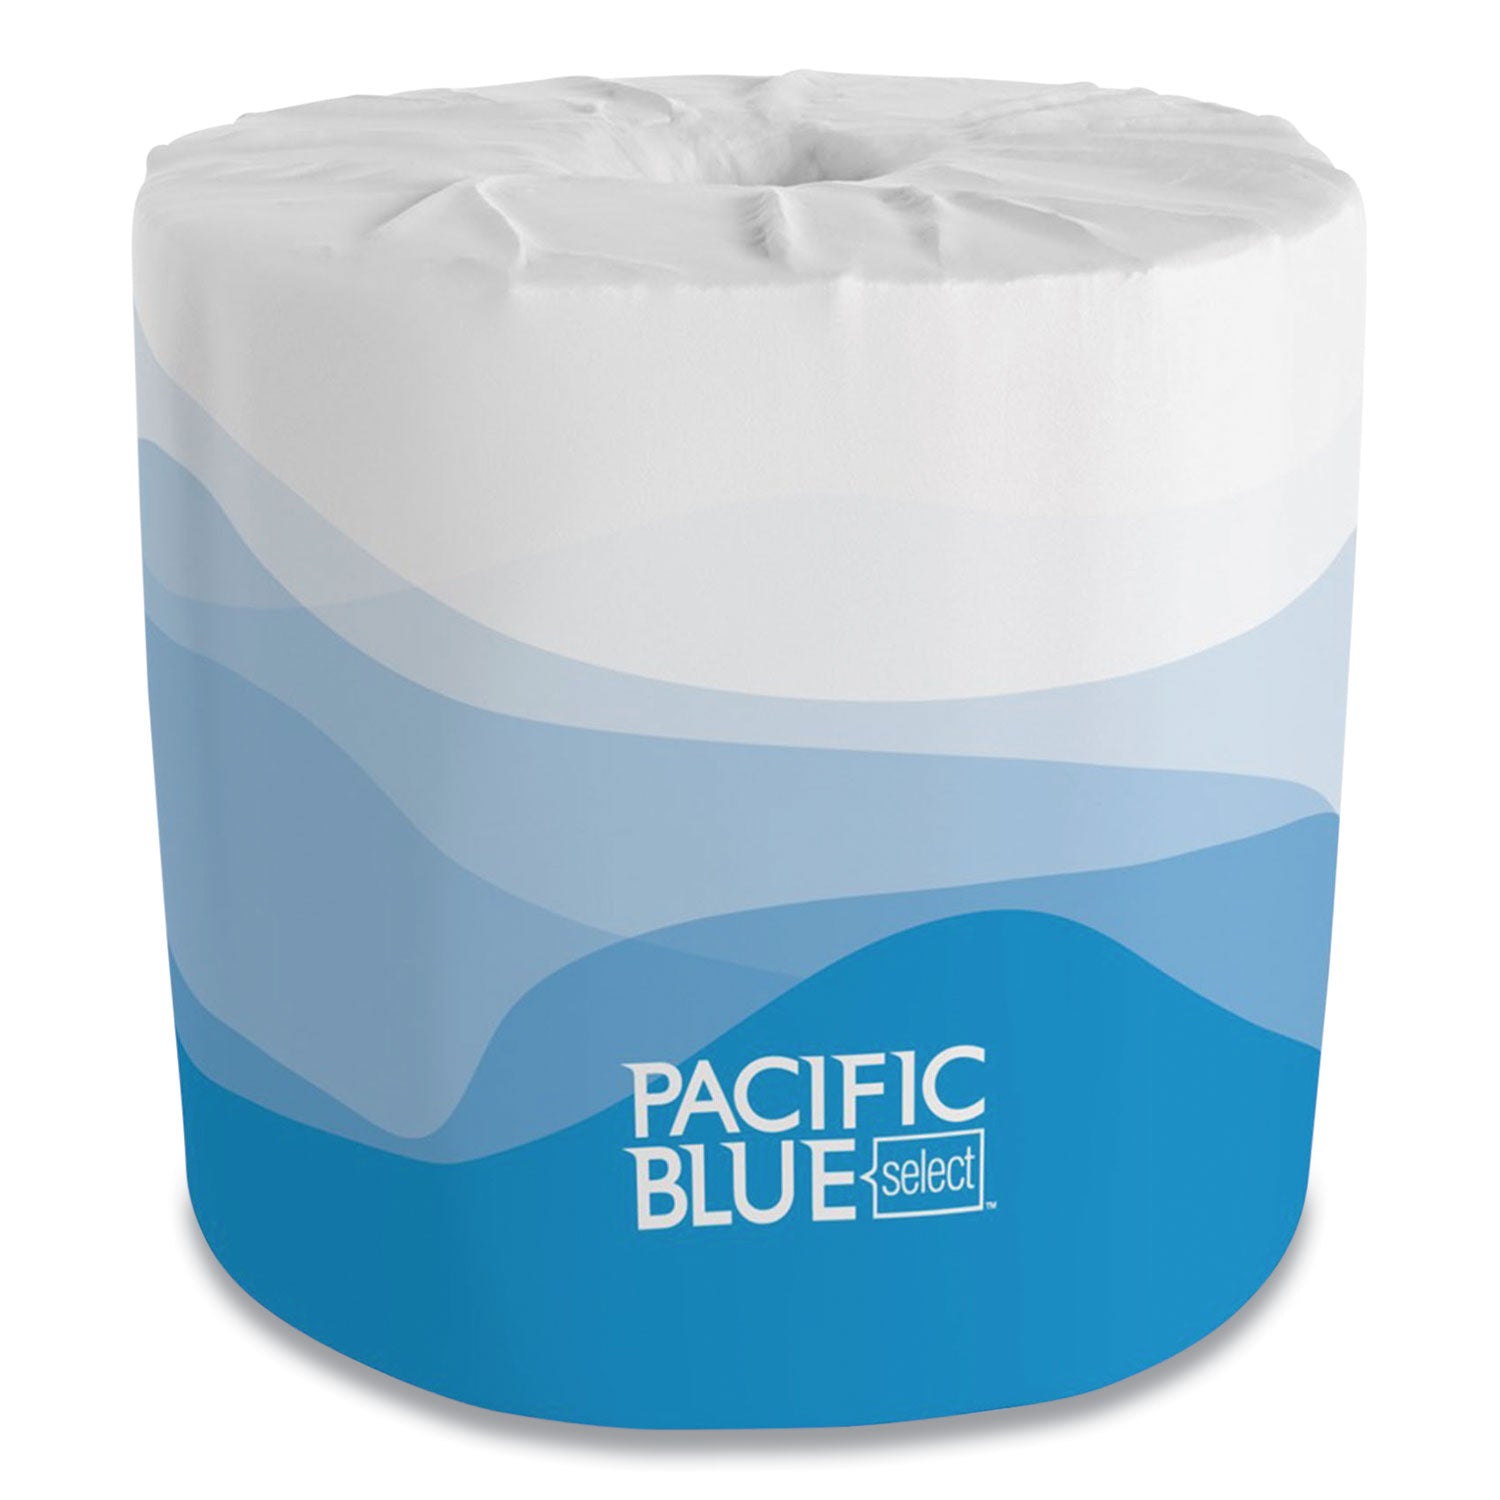 Pacific Blue Select Bathroom Tissue, Septic Safe, 2-Ply, White, 550 Sheets/Roll, 80 Rolls/Carton - 